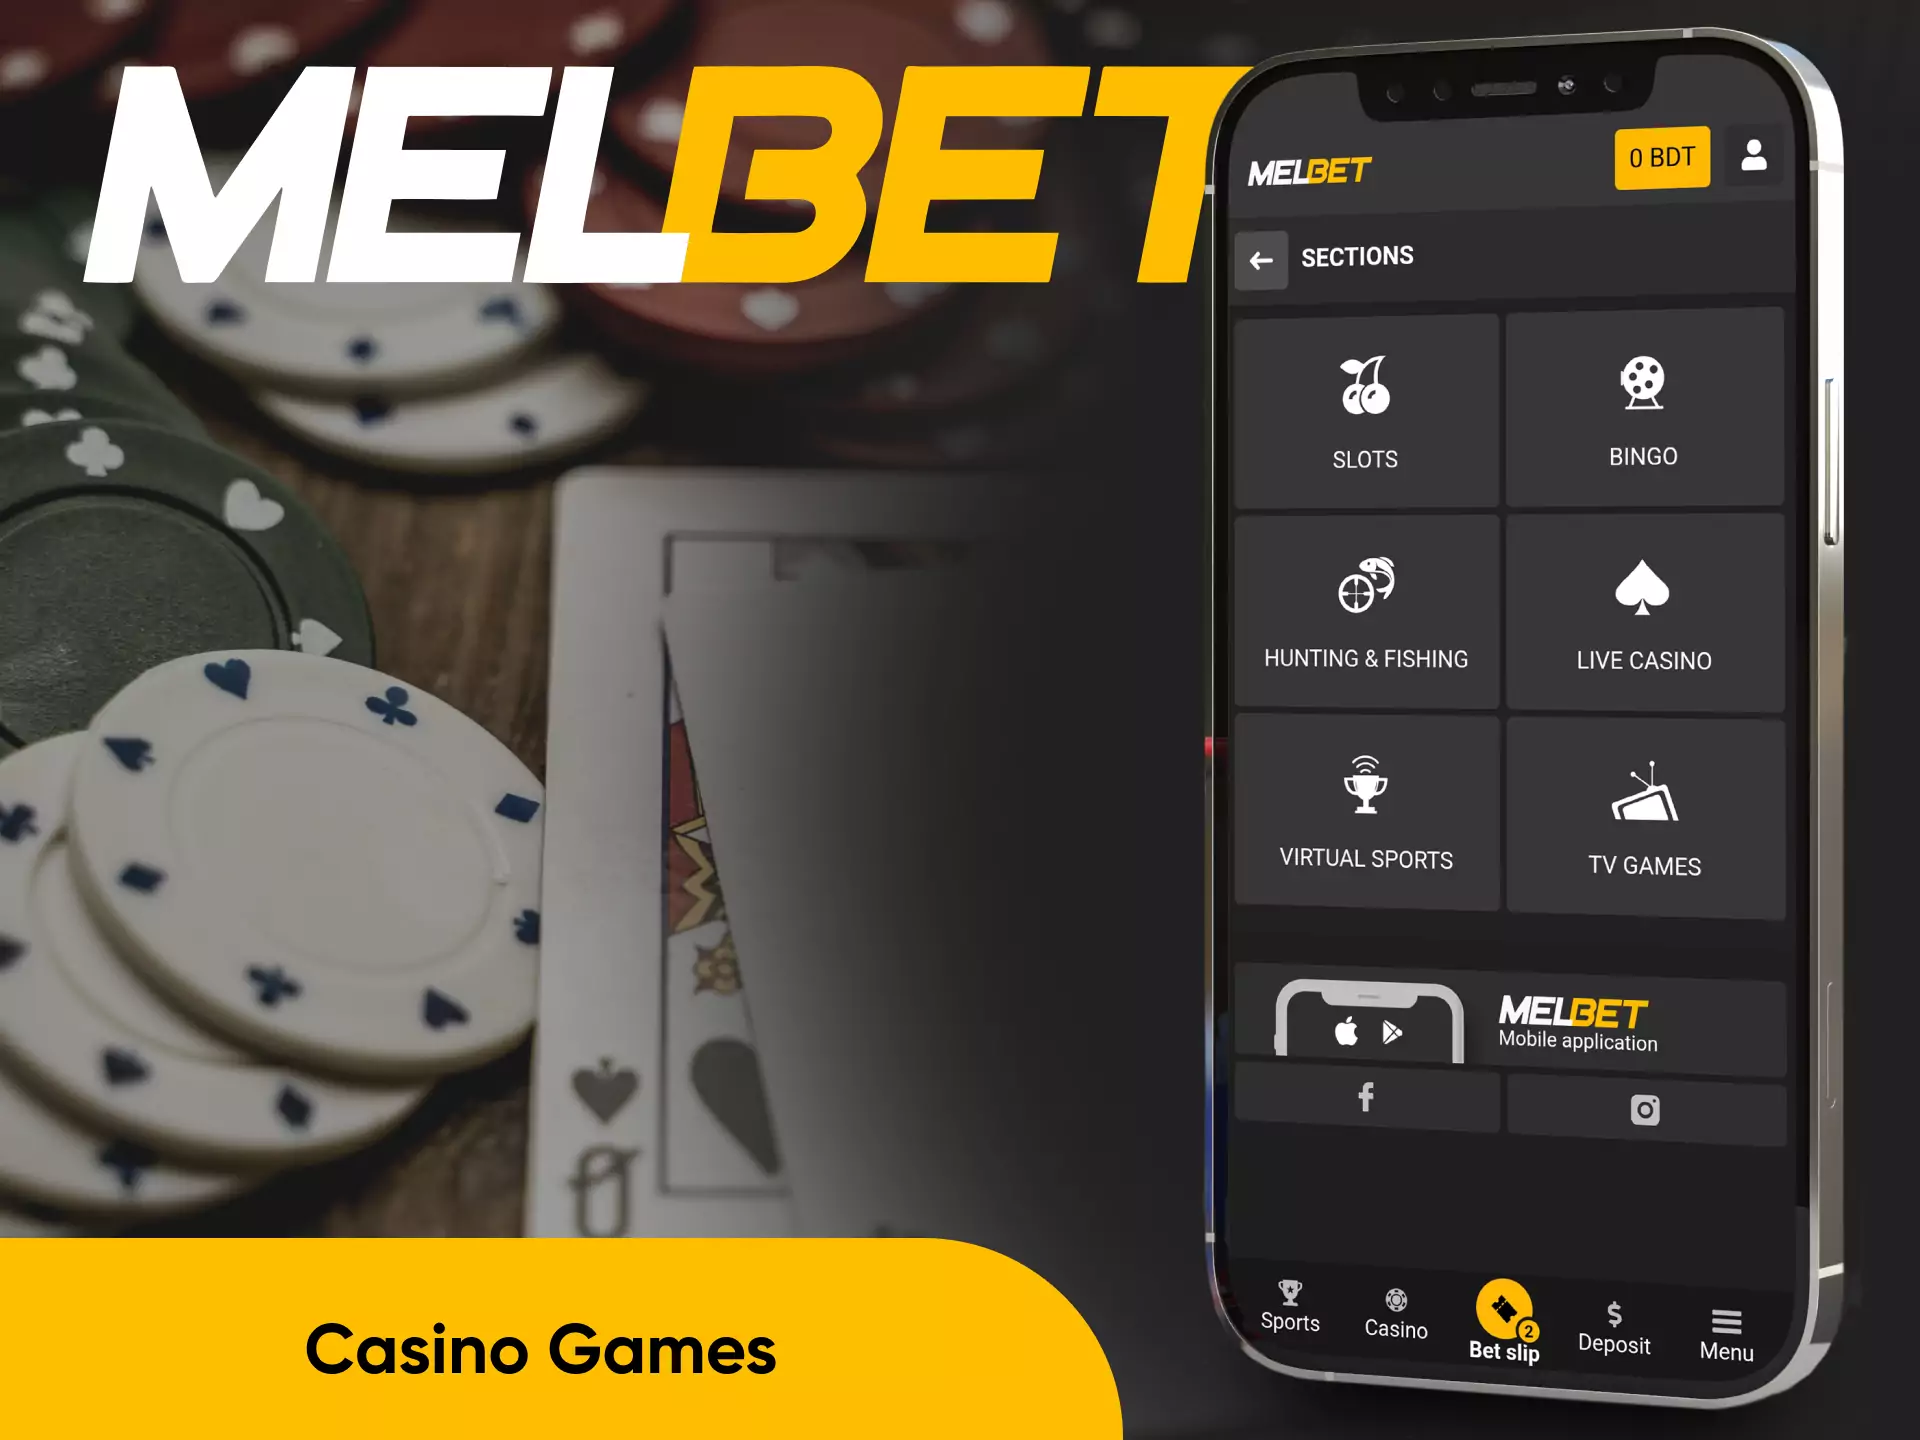 Slots, poker, blackjack, and jackpot games are all available in the Melbet app.